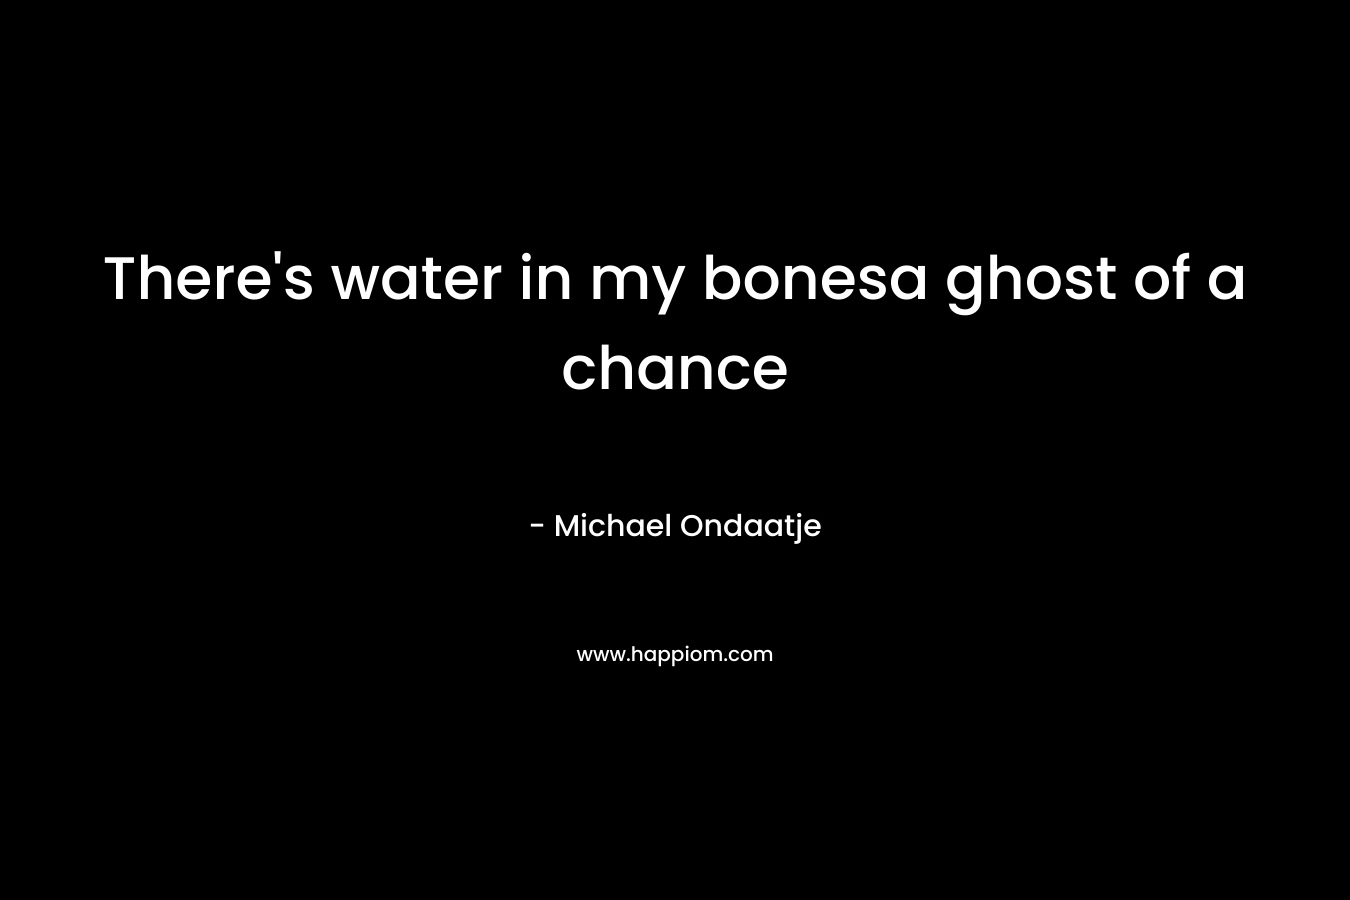 There’s water in my bonesa ghost of a chance – Michael Ondaatje